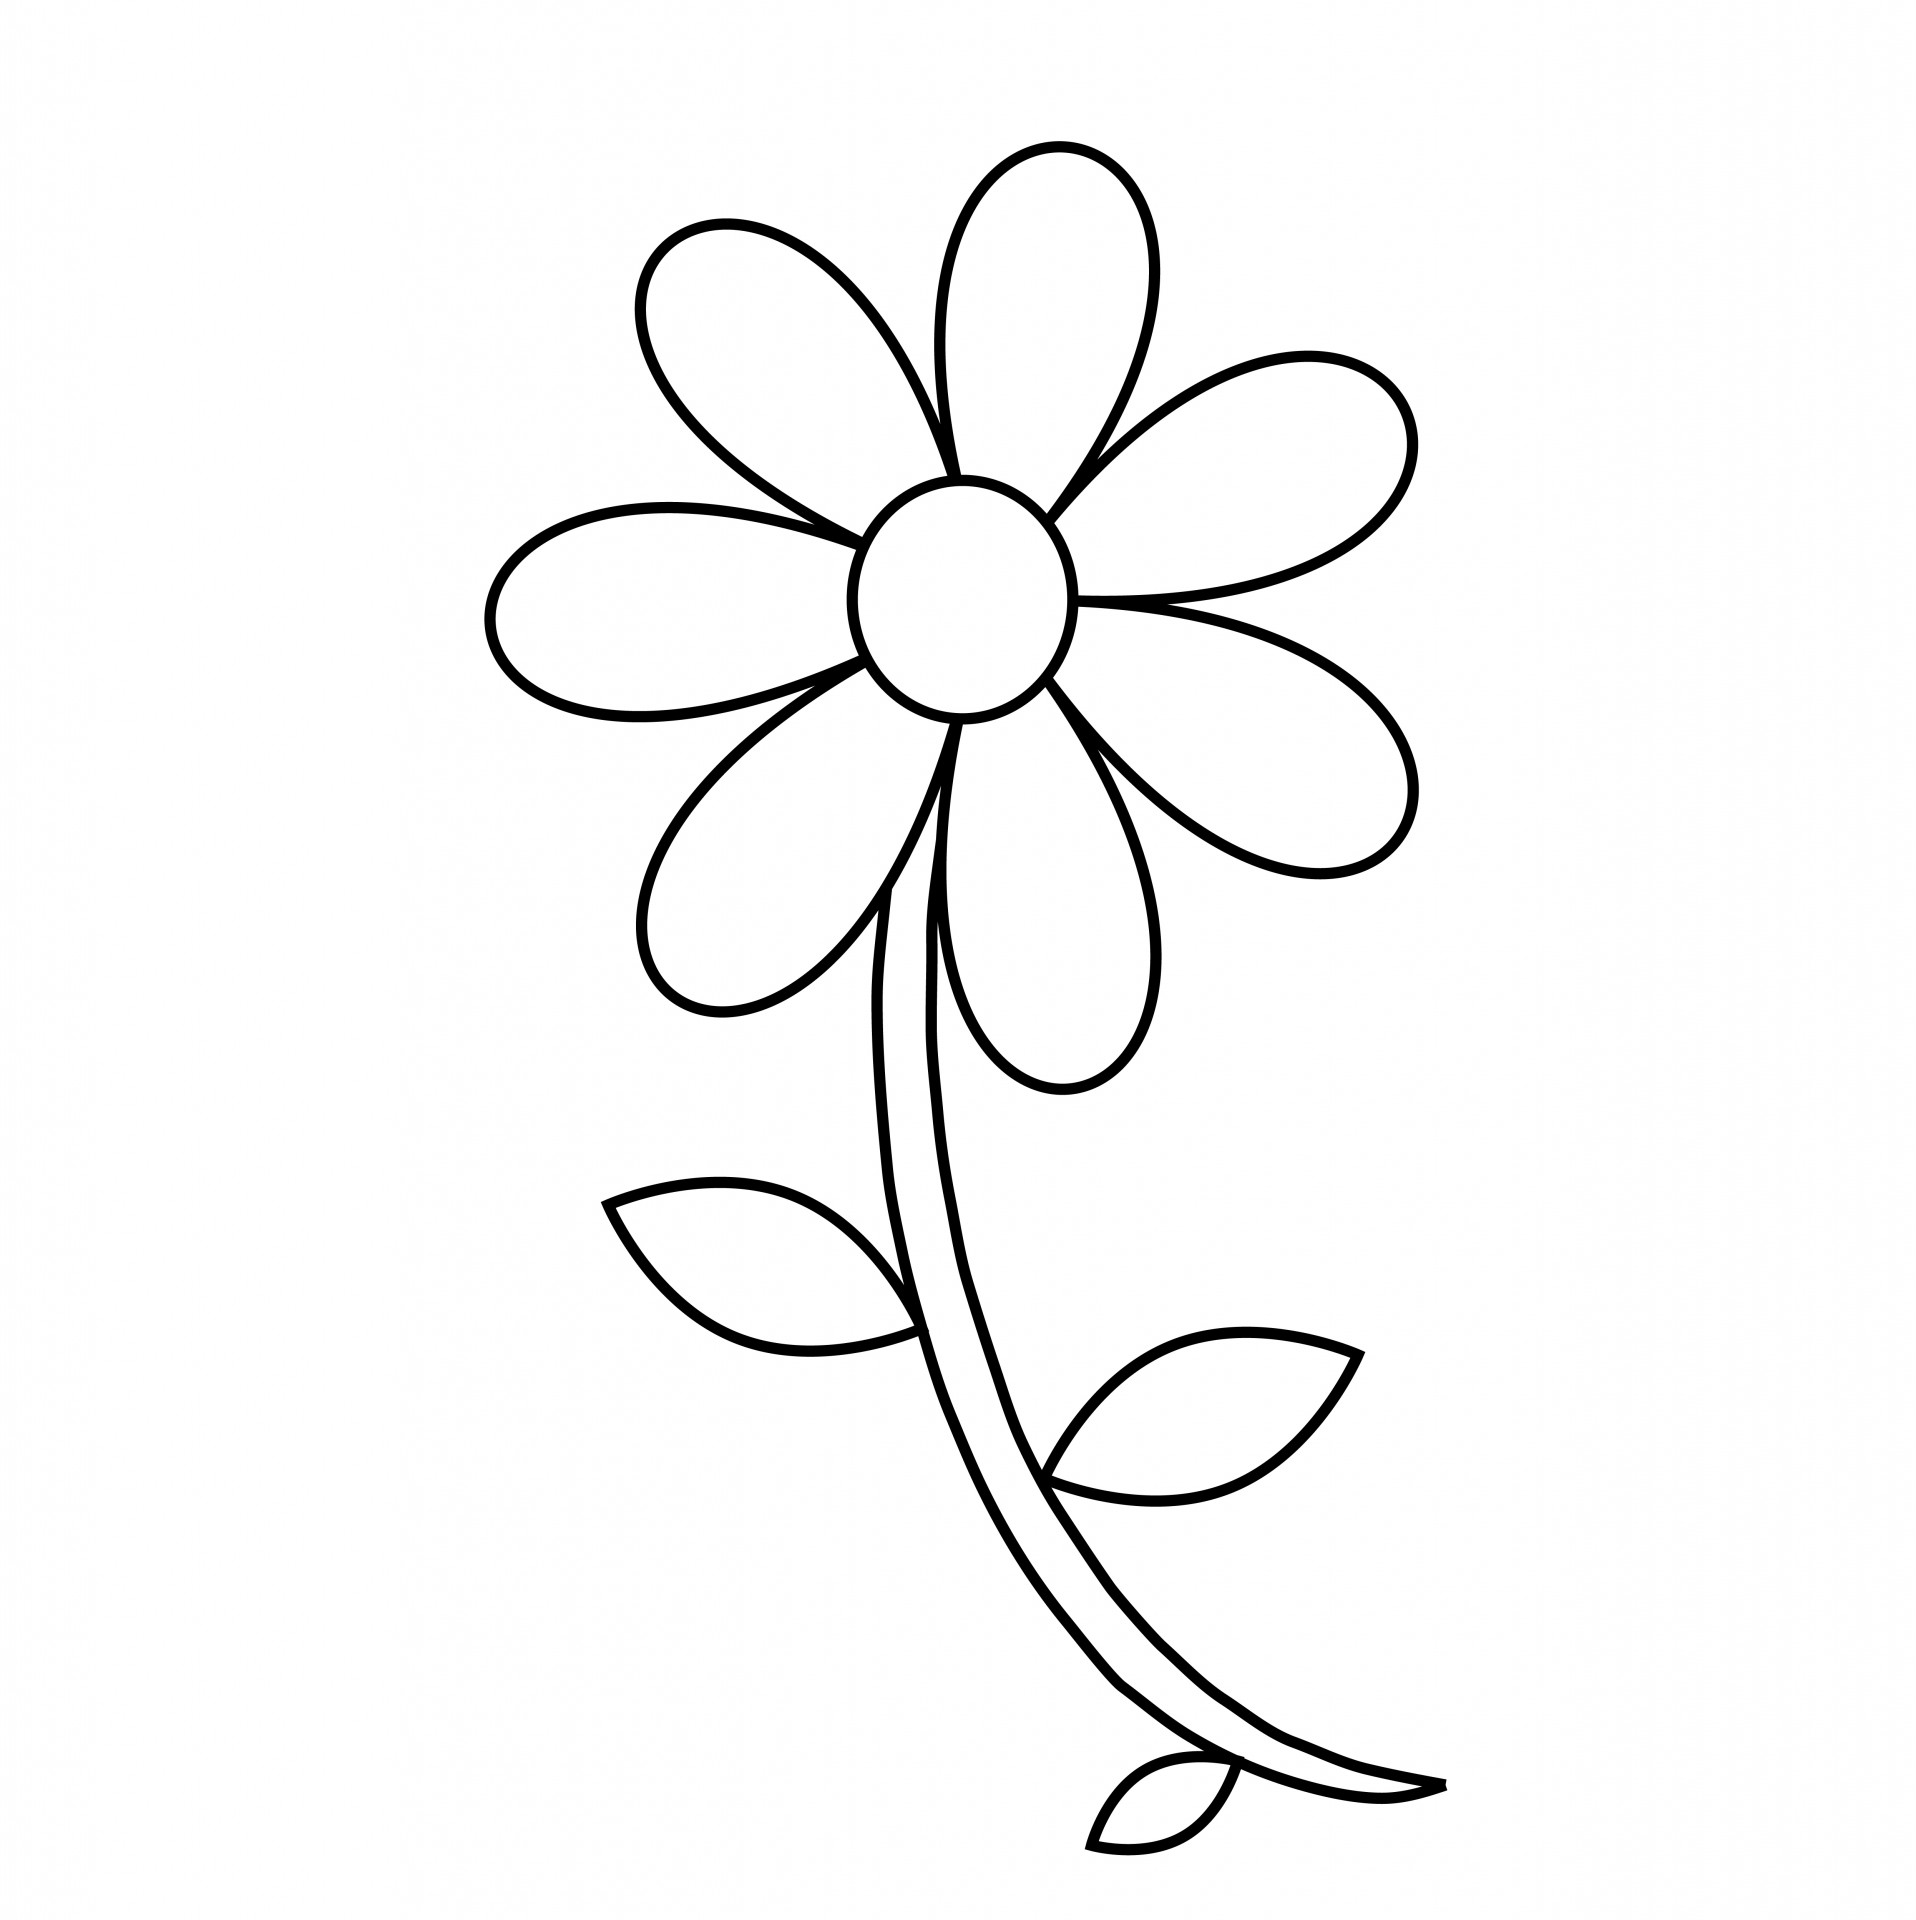 Flower Outline Coloring Pages